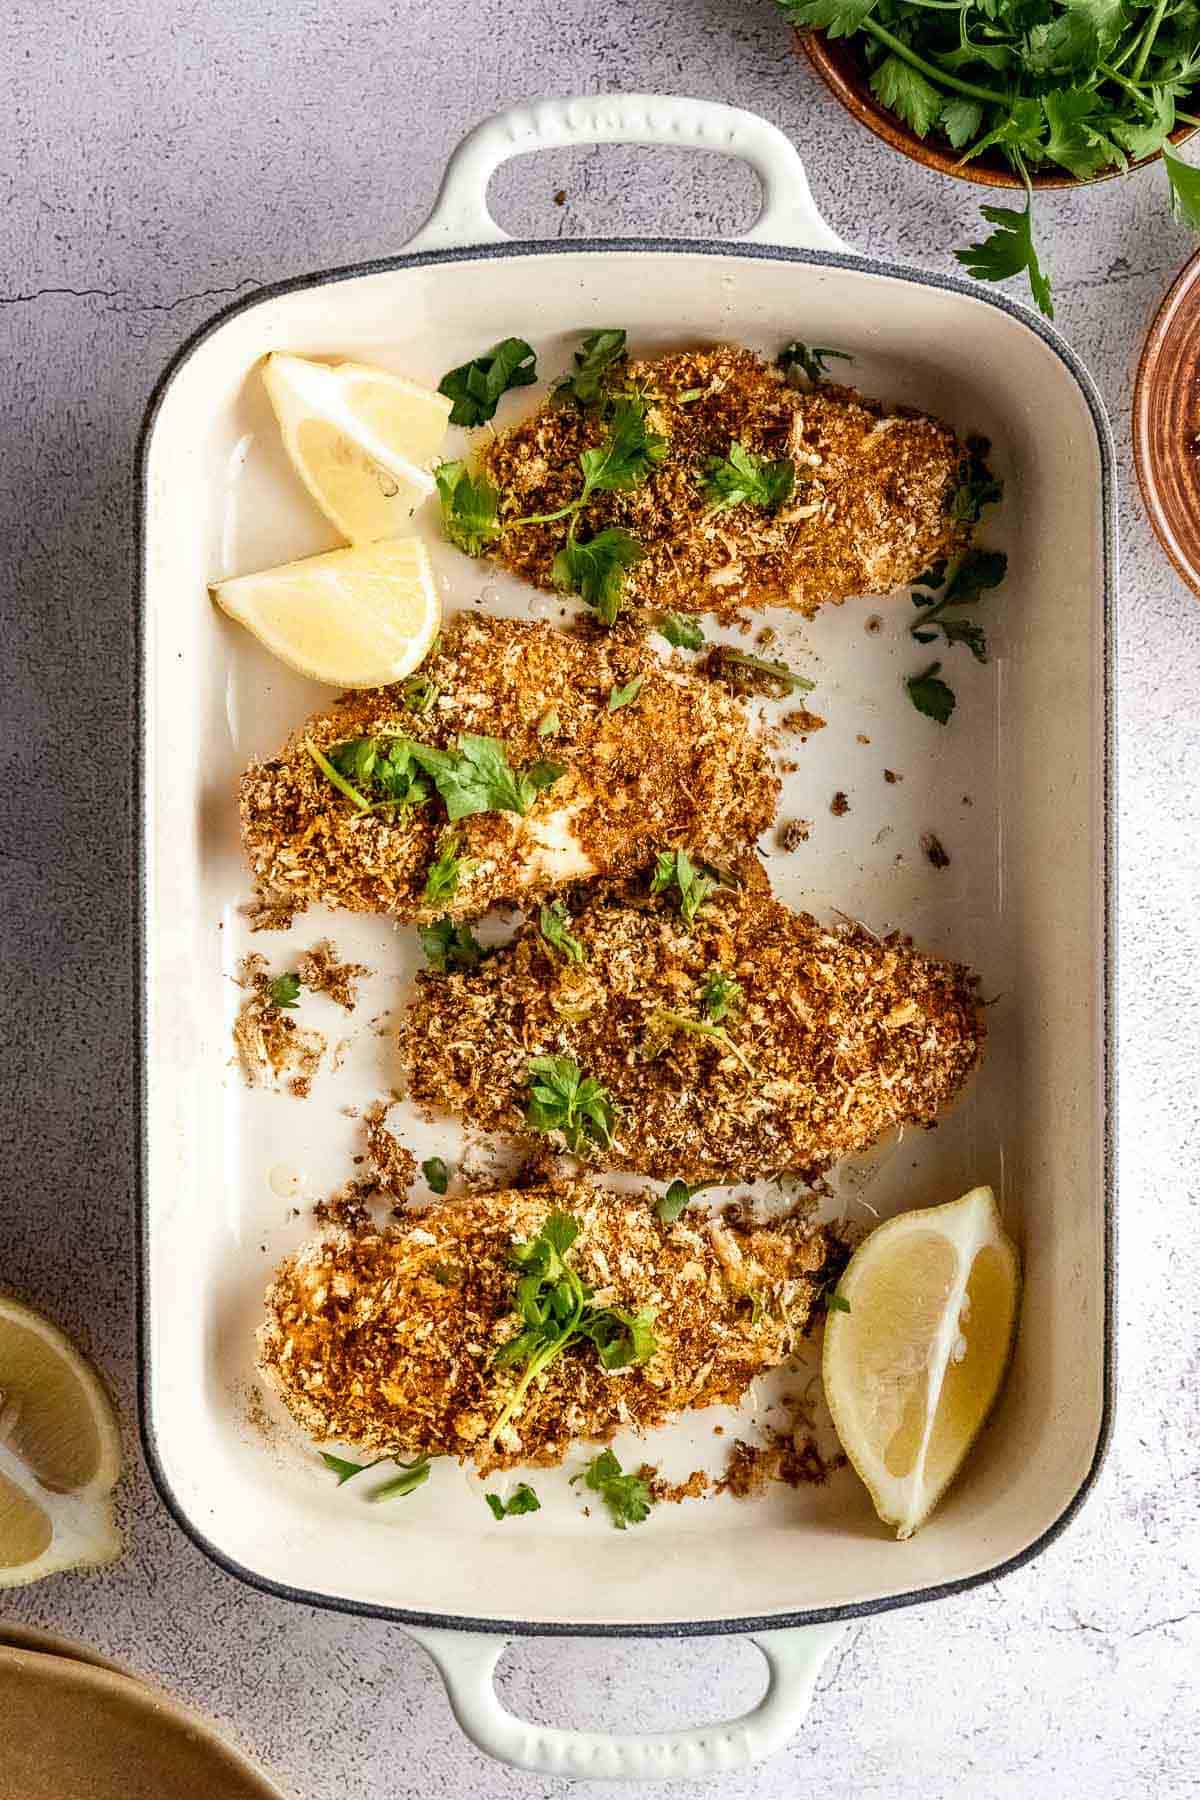 Baked crusted chicken in a baking dish with lemon wedges.